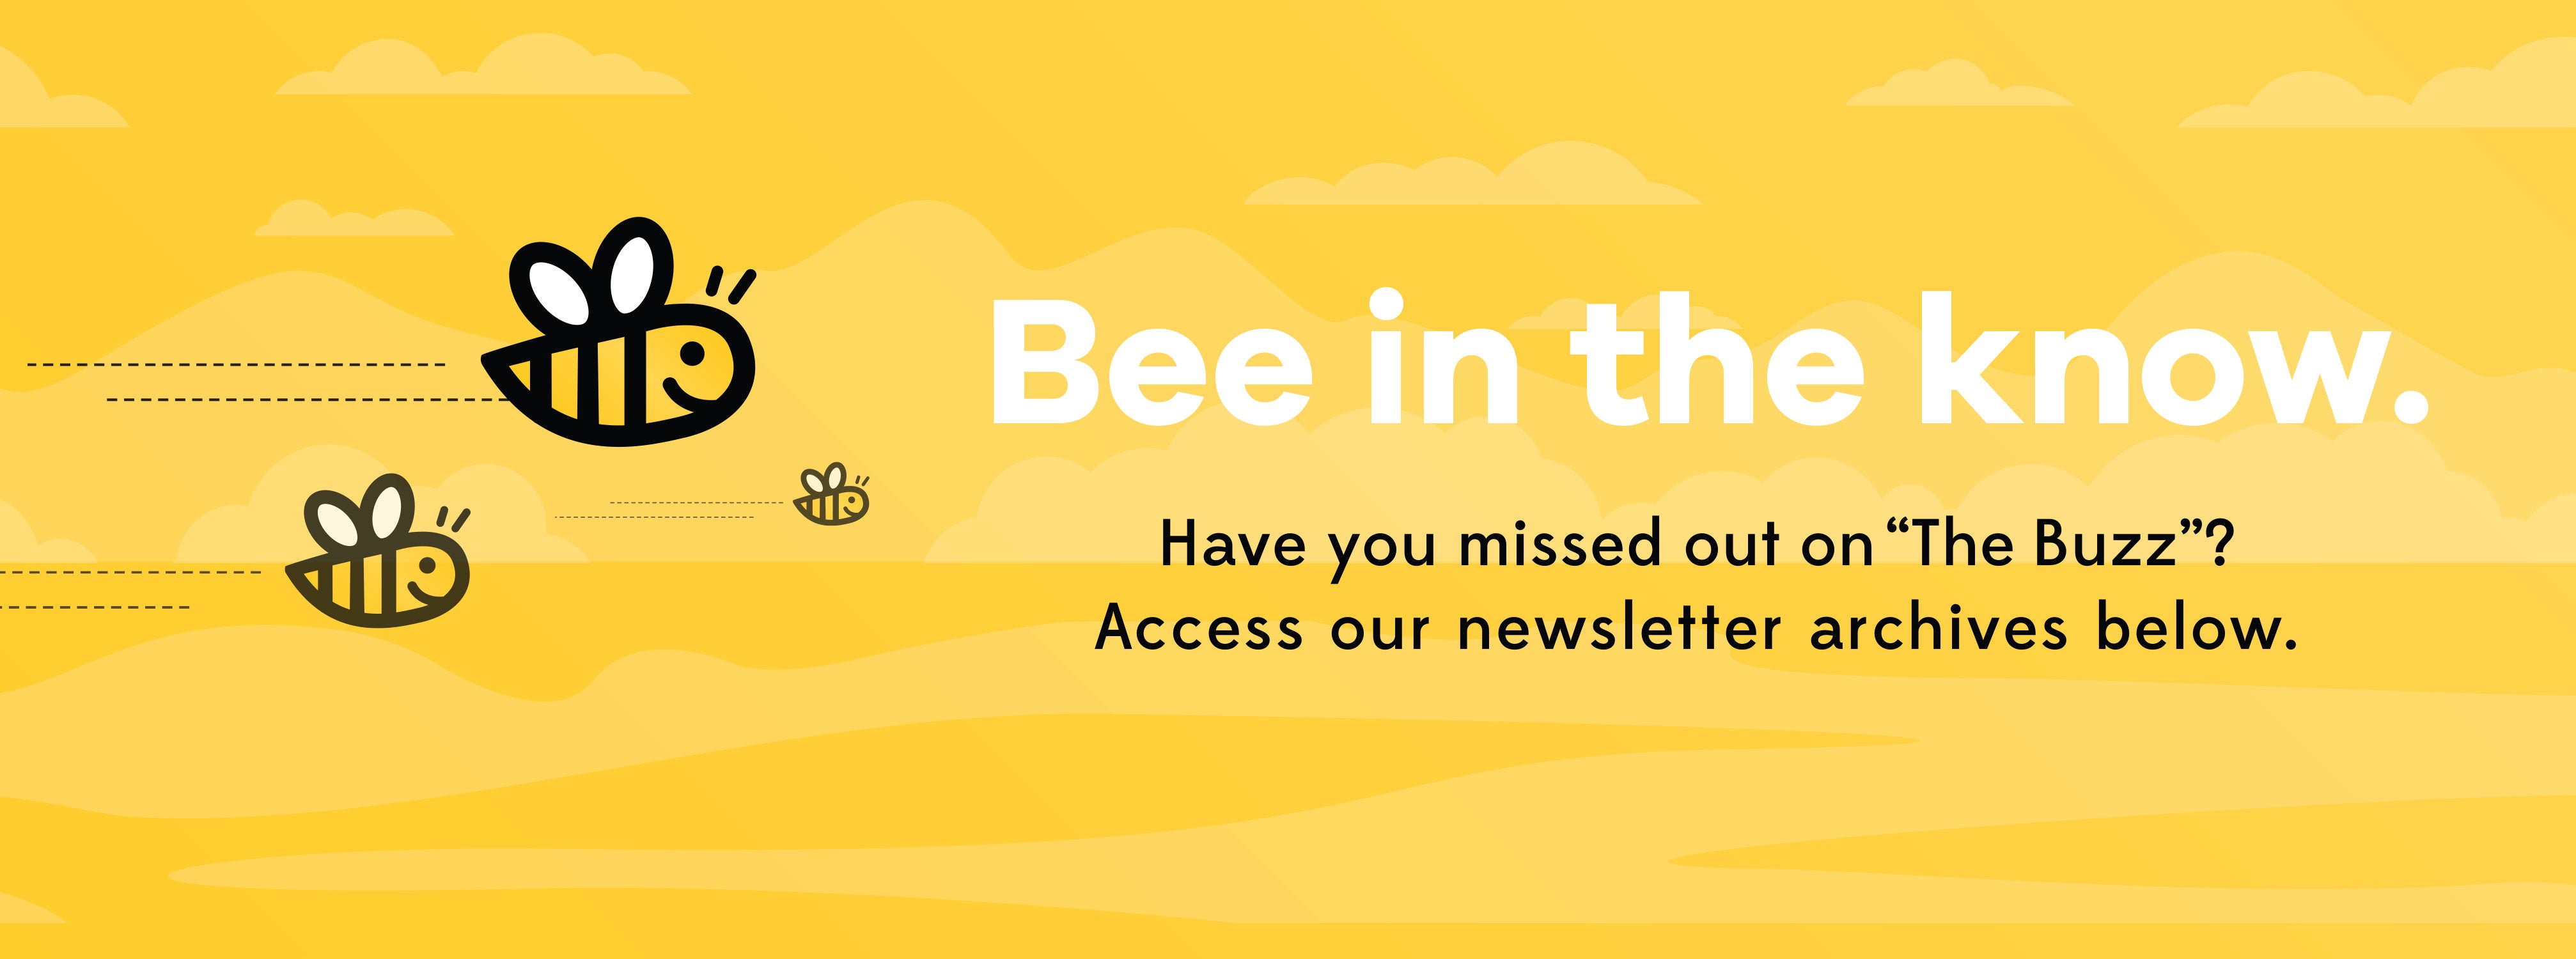 Bee in the Know Newsletter banner